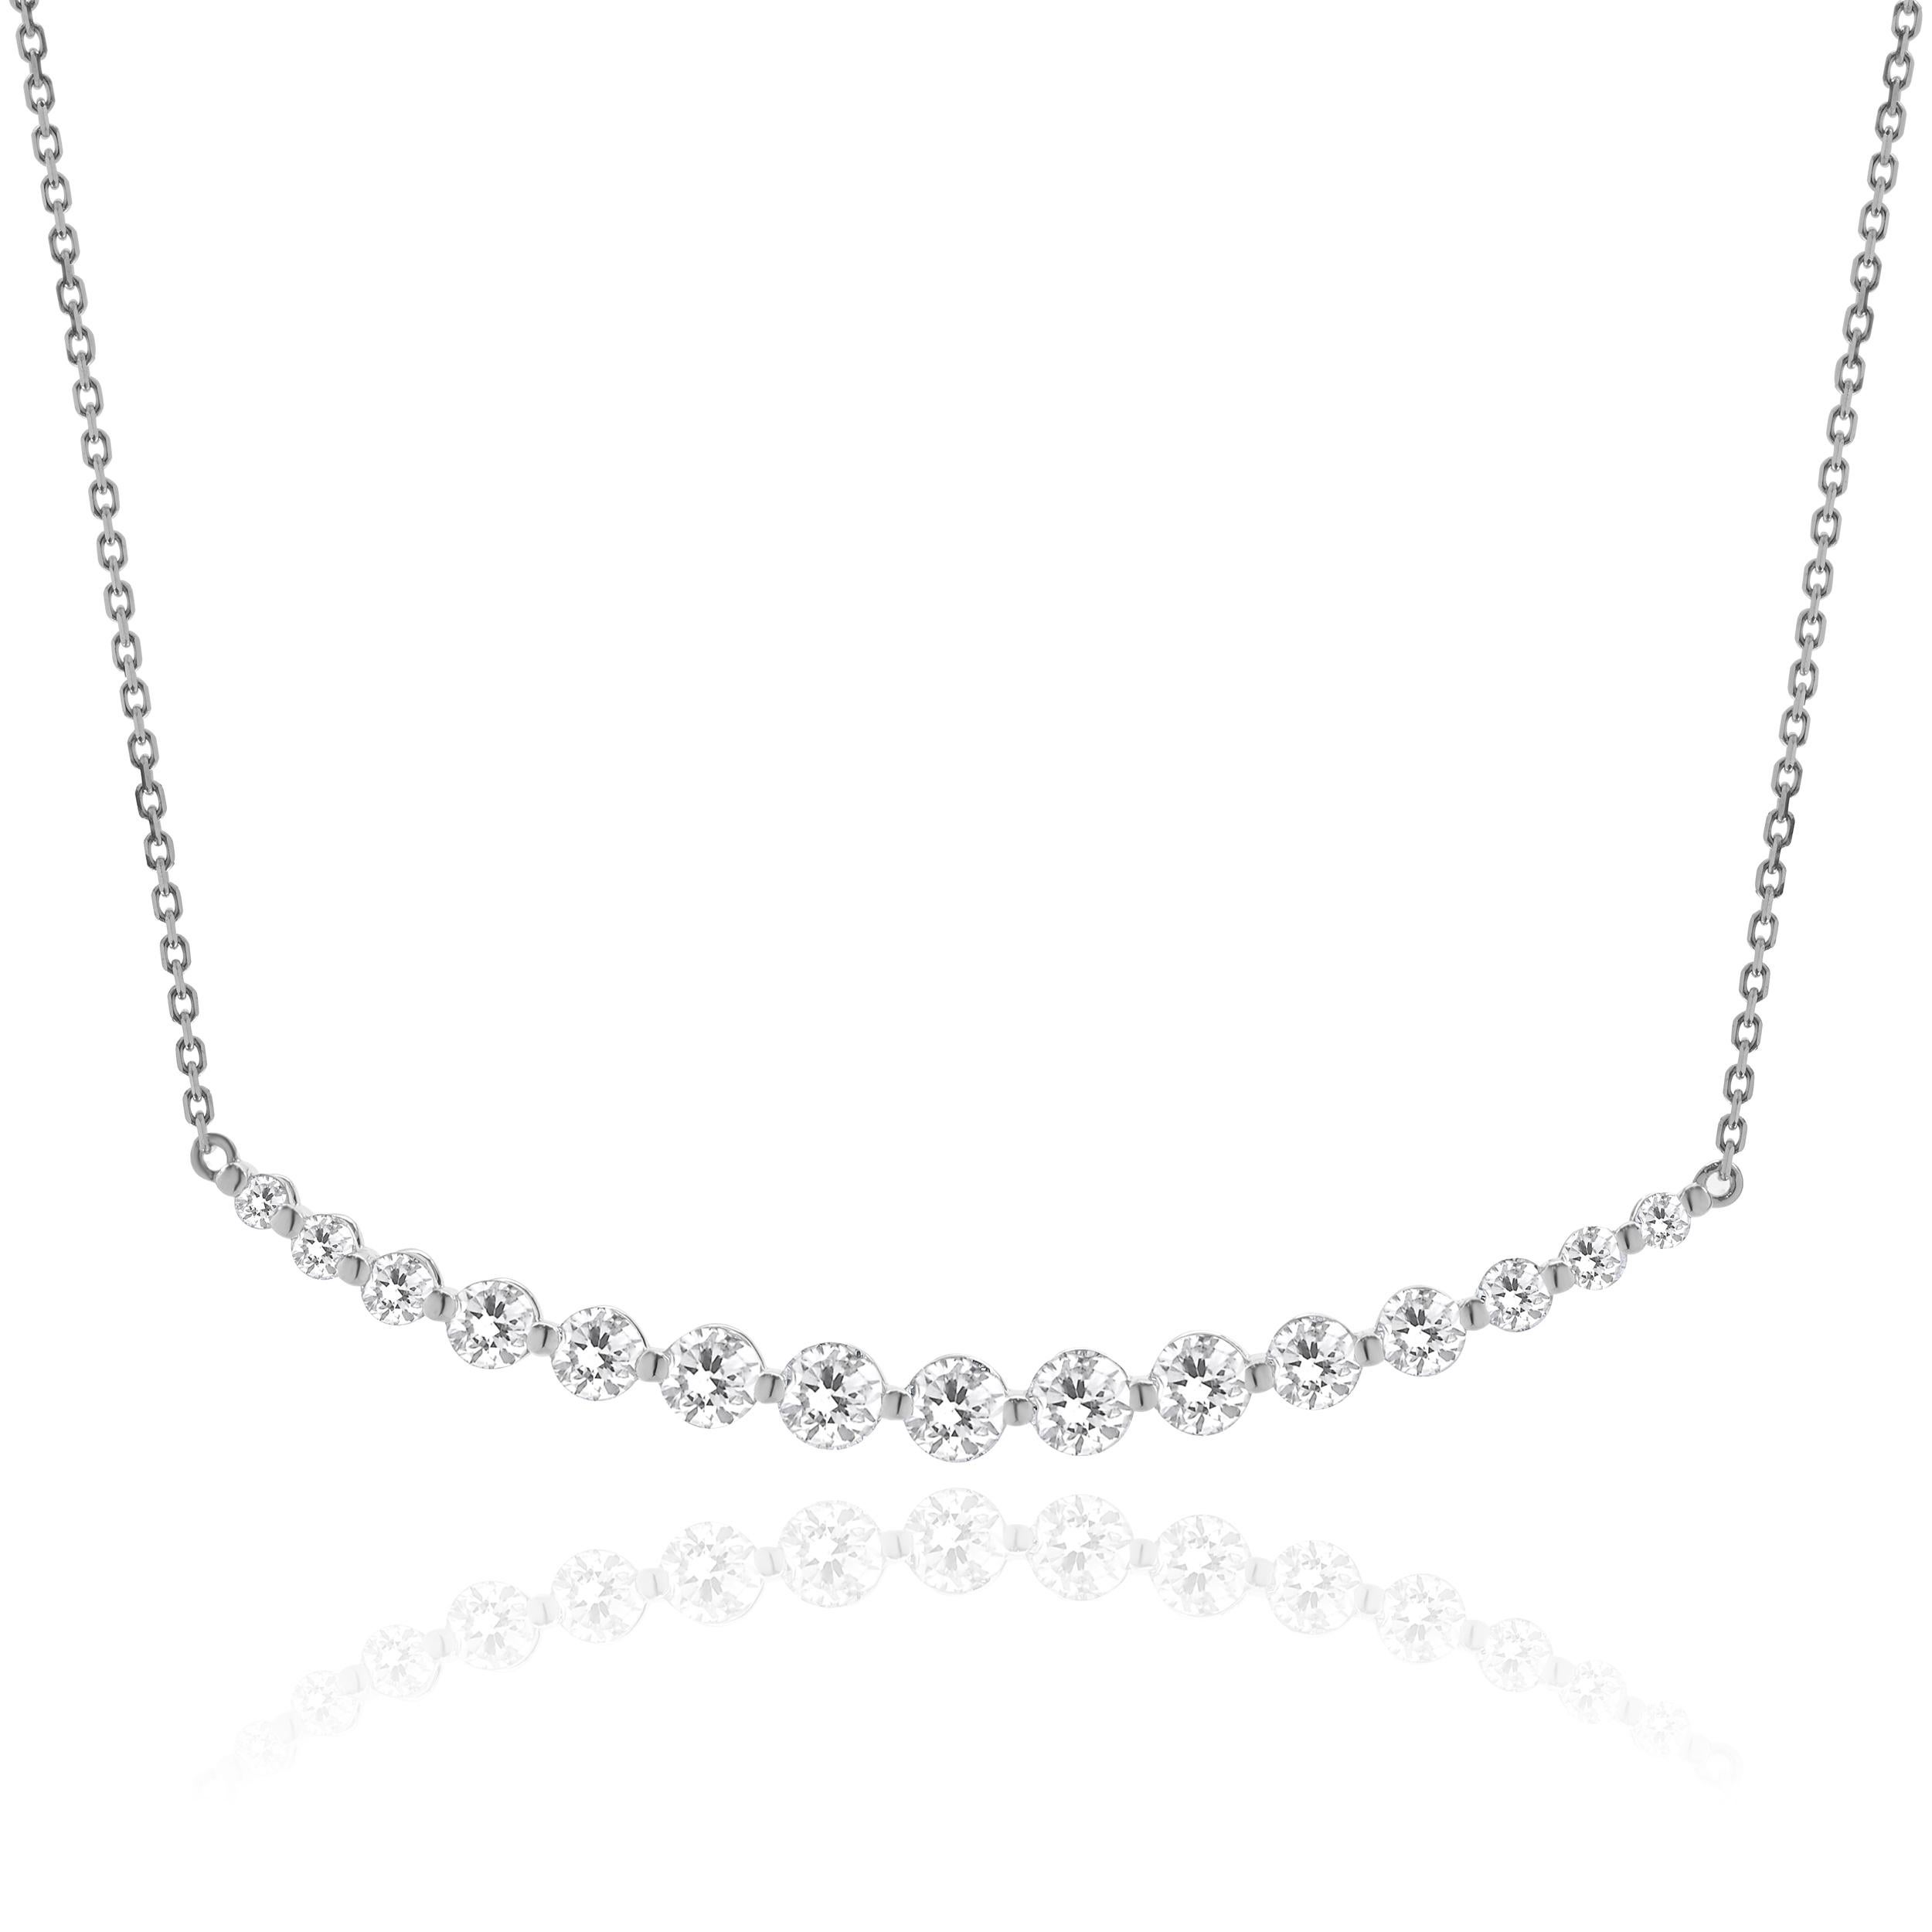 Designer: custom
Material: 18K white gold
Diamonds: 15 round brilliant cut = 2.03cttw
Color: G 
Clarity: VS2-SI1
Dimensions: necklace measures 18-inches in length 
Weight: 4.57 grams